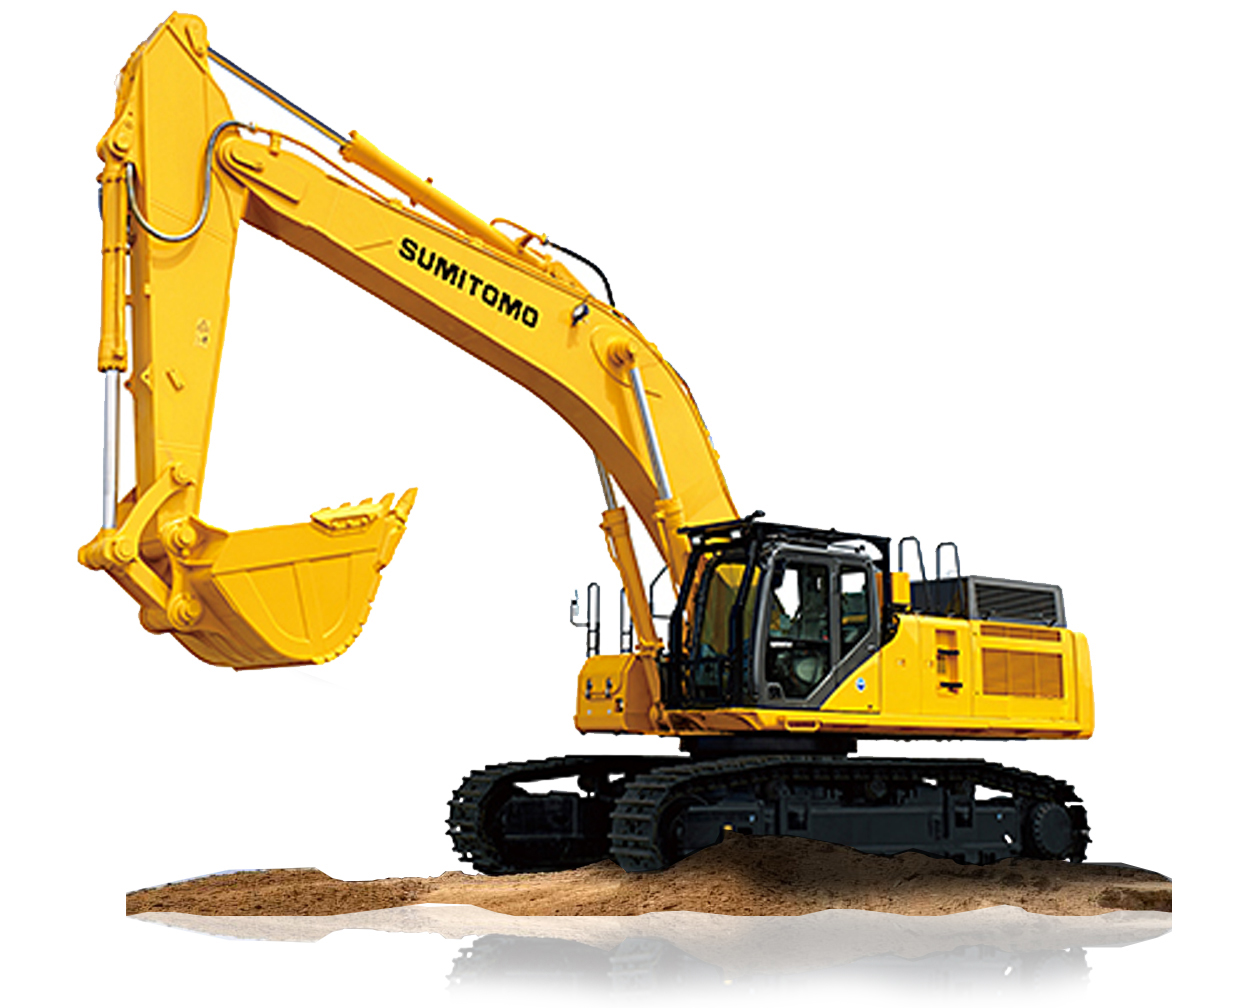 DOMESTIC AND COMMERCIAL DEMOLITION AND EXCAVATION